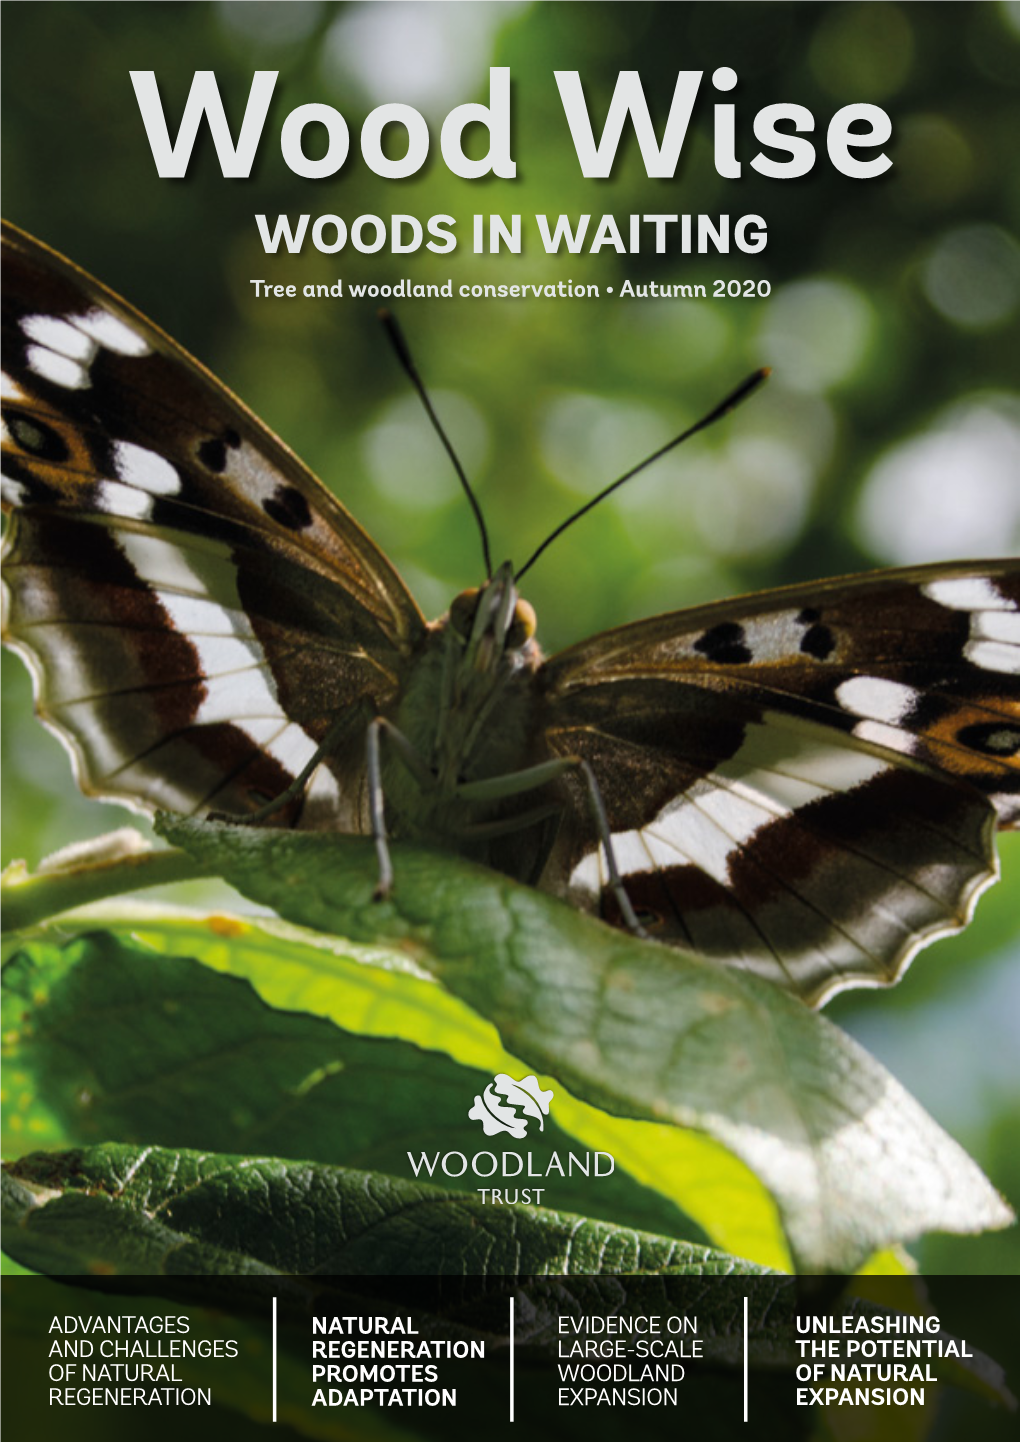 Woodwise, Woods in Waiting, Autumn 2020